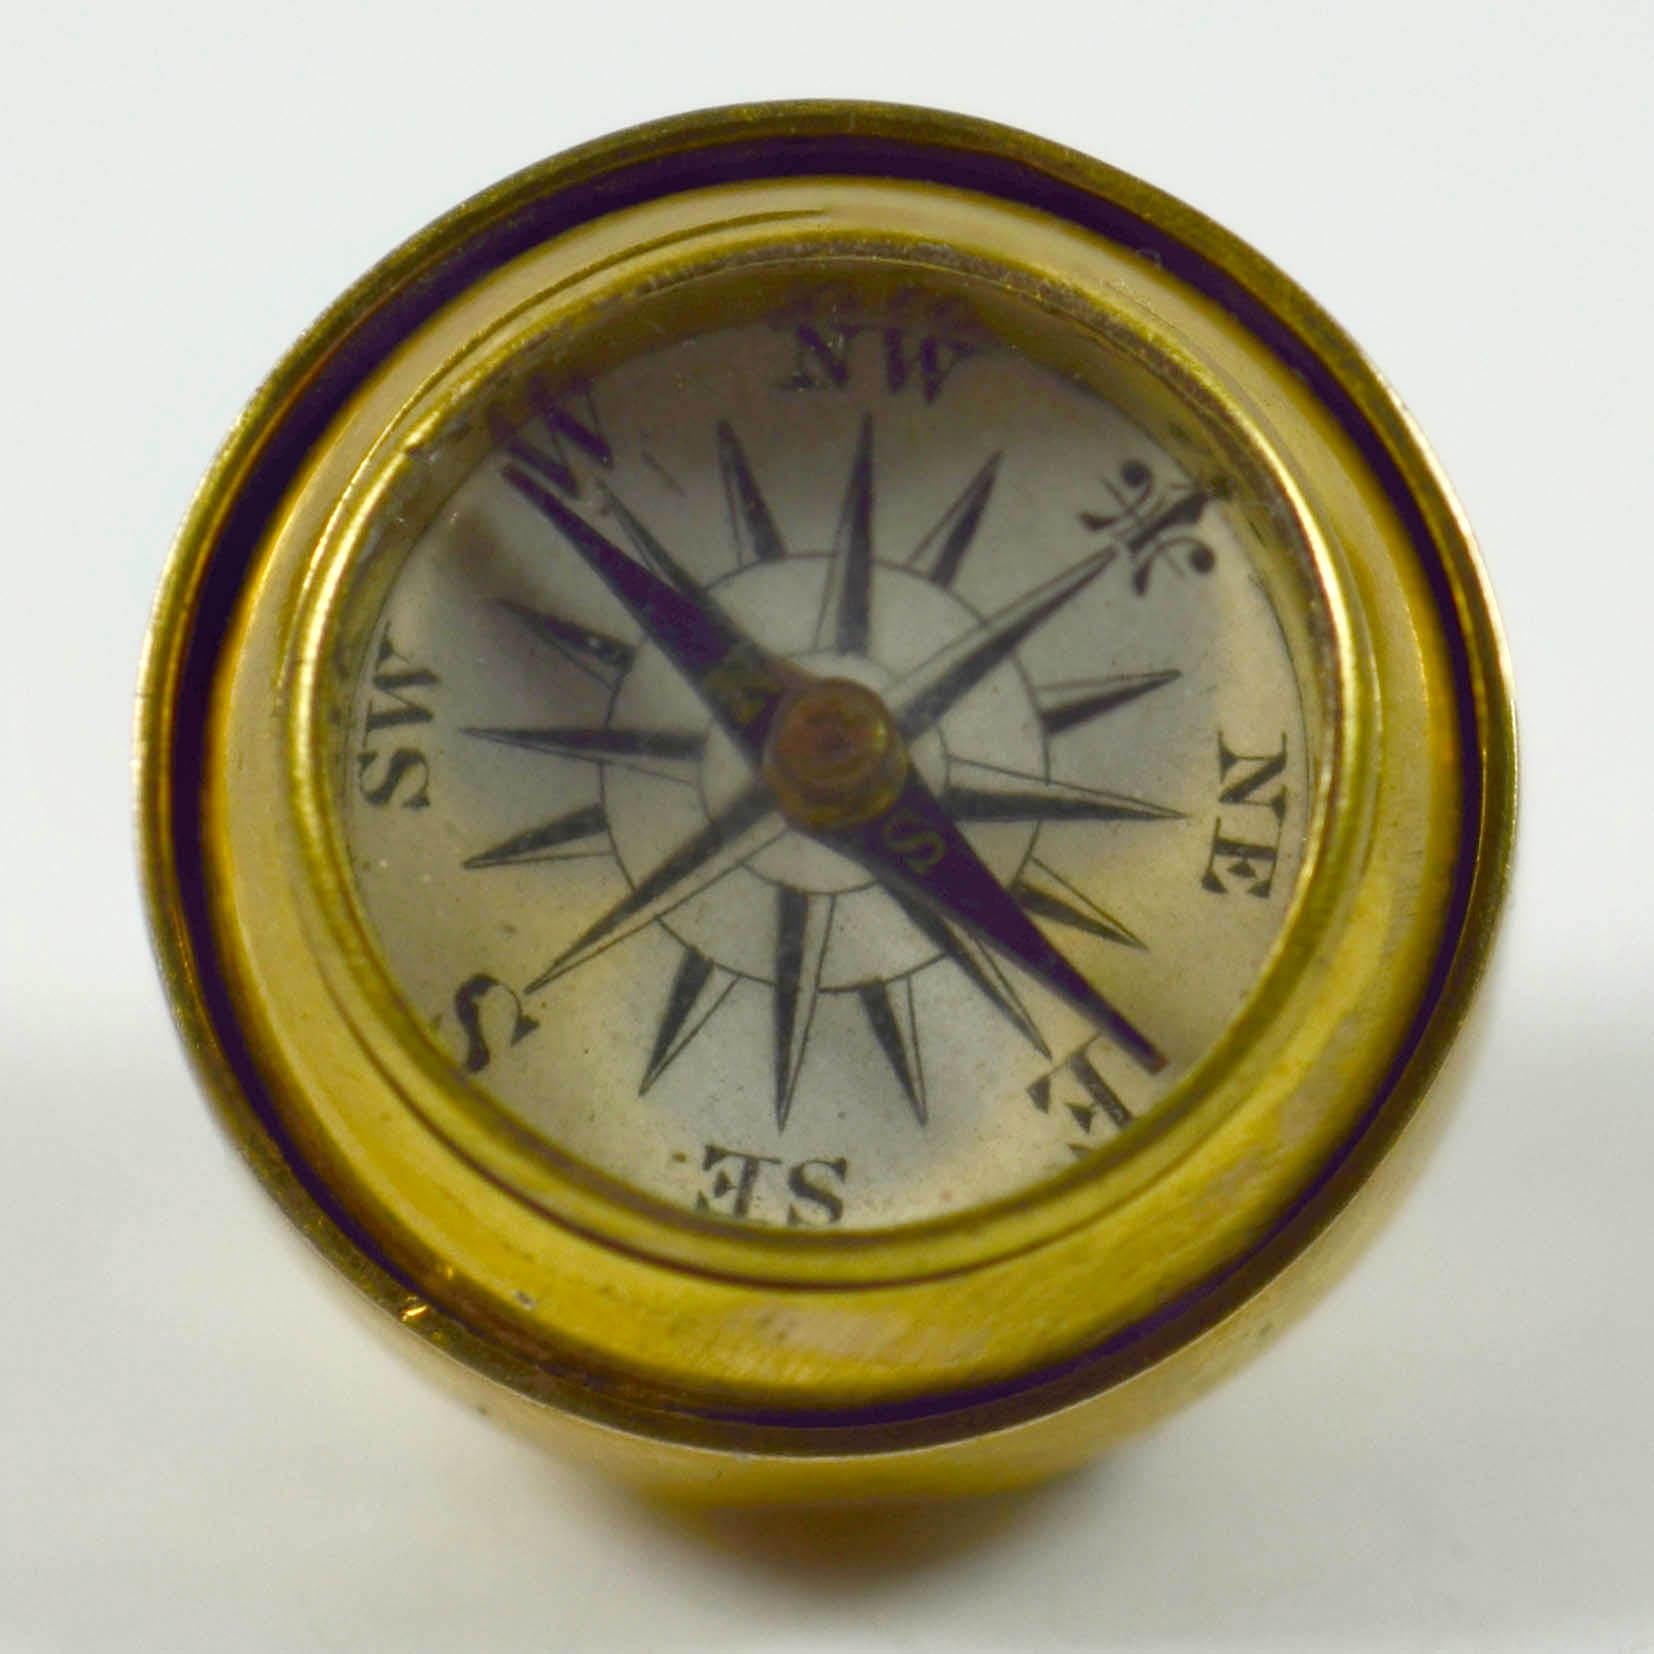 An antique fob or charm designed as a ball with rotating section, opening to display a compass. The fob is unmarked, but tests as high karat gold. The compass is in good working order, and has a blue magnetic needle with N and S marked in gold. The